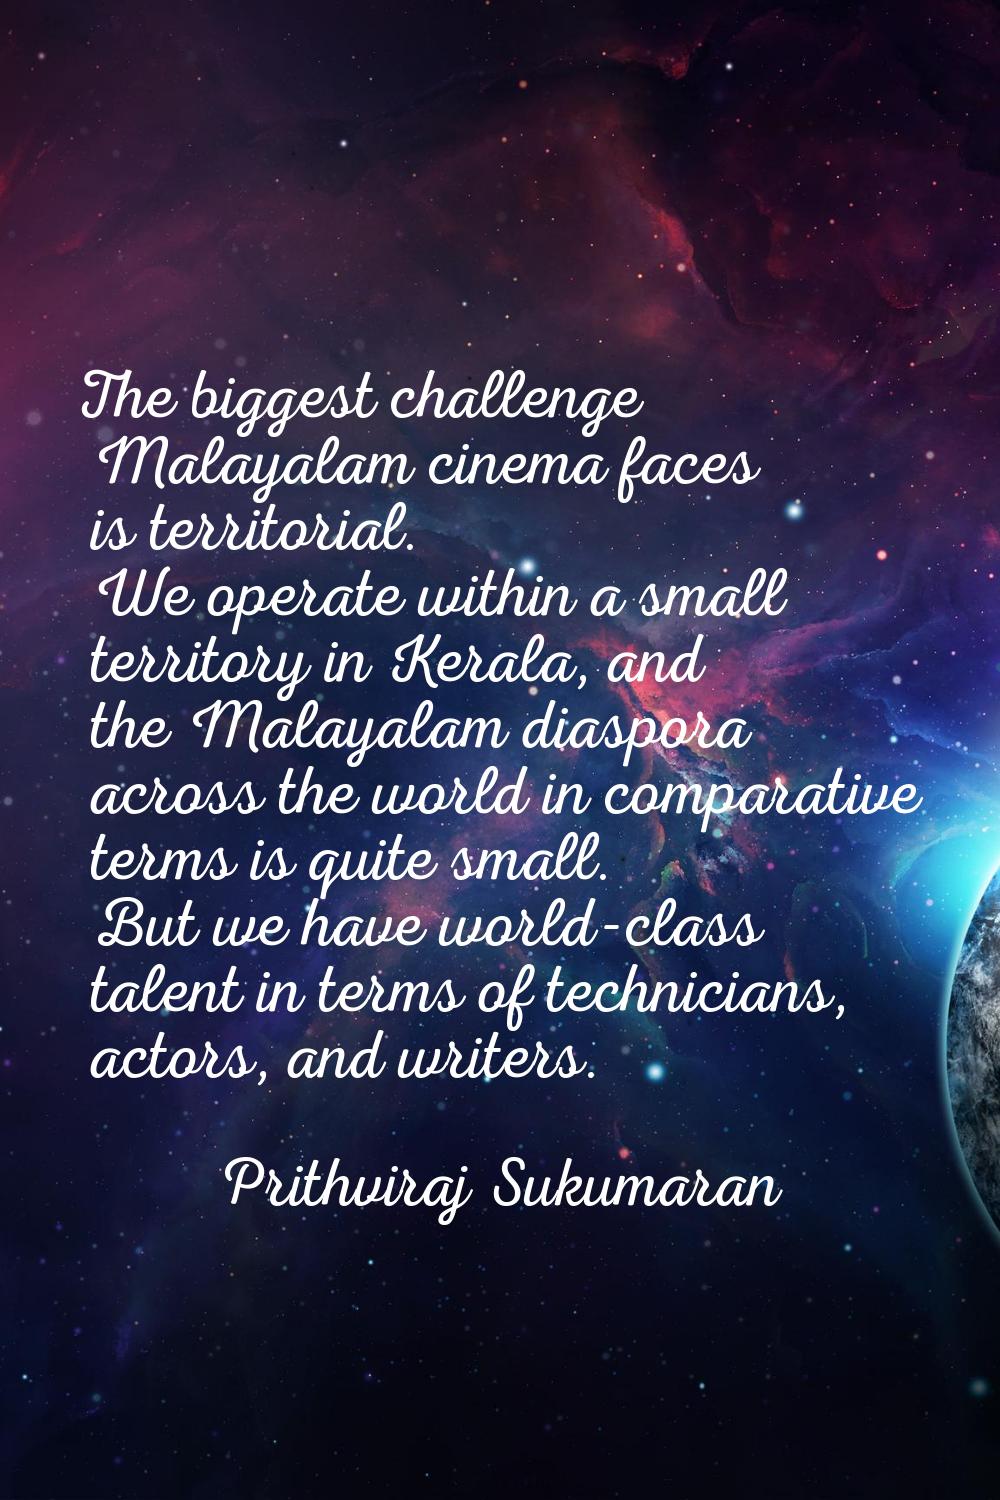 The biggest challenge Malayalam cinema faces is territorial. We operate within a small territory in